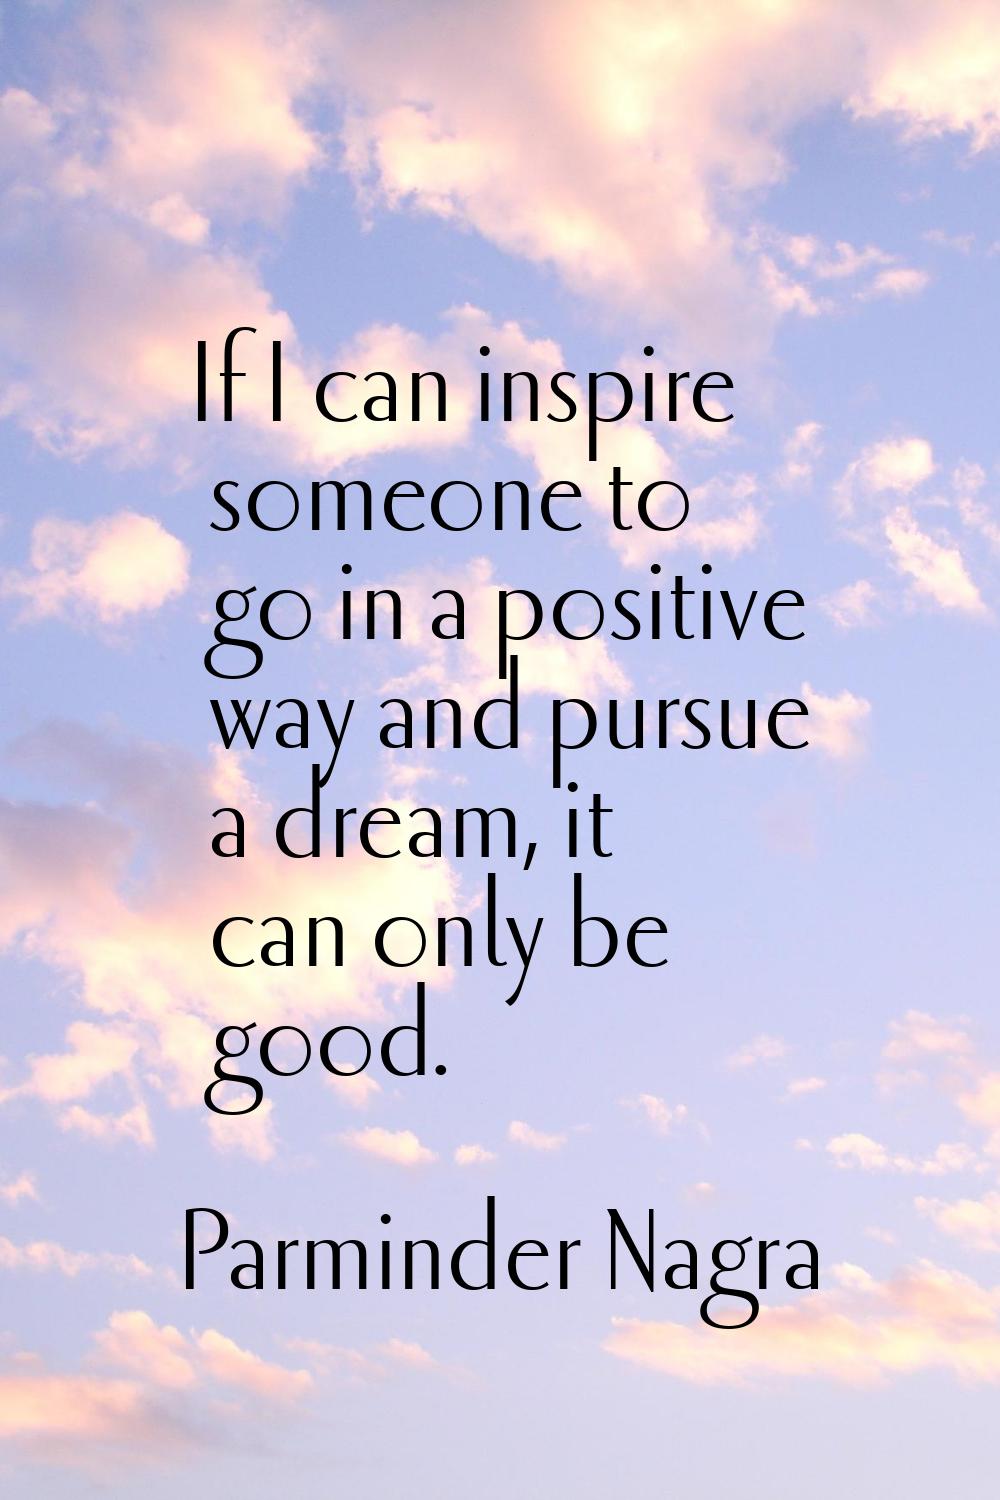 If I can inspire someone to go in a positive way and pursue a dream, it can only be good.